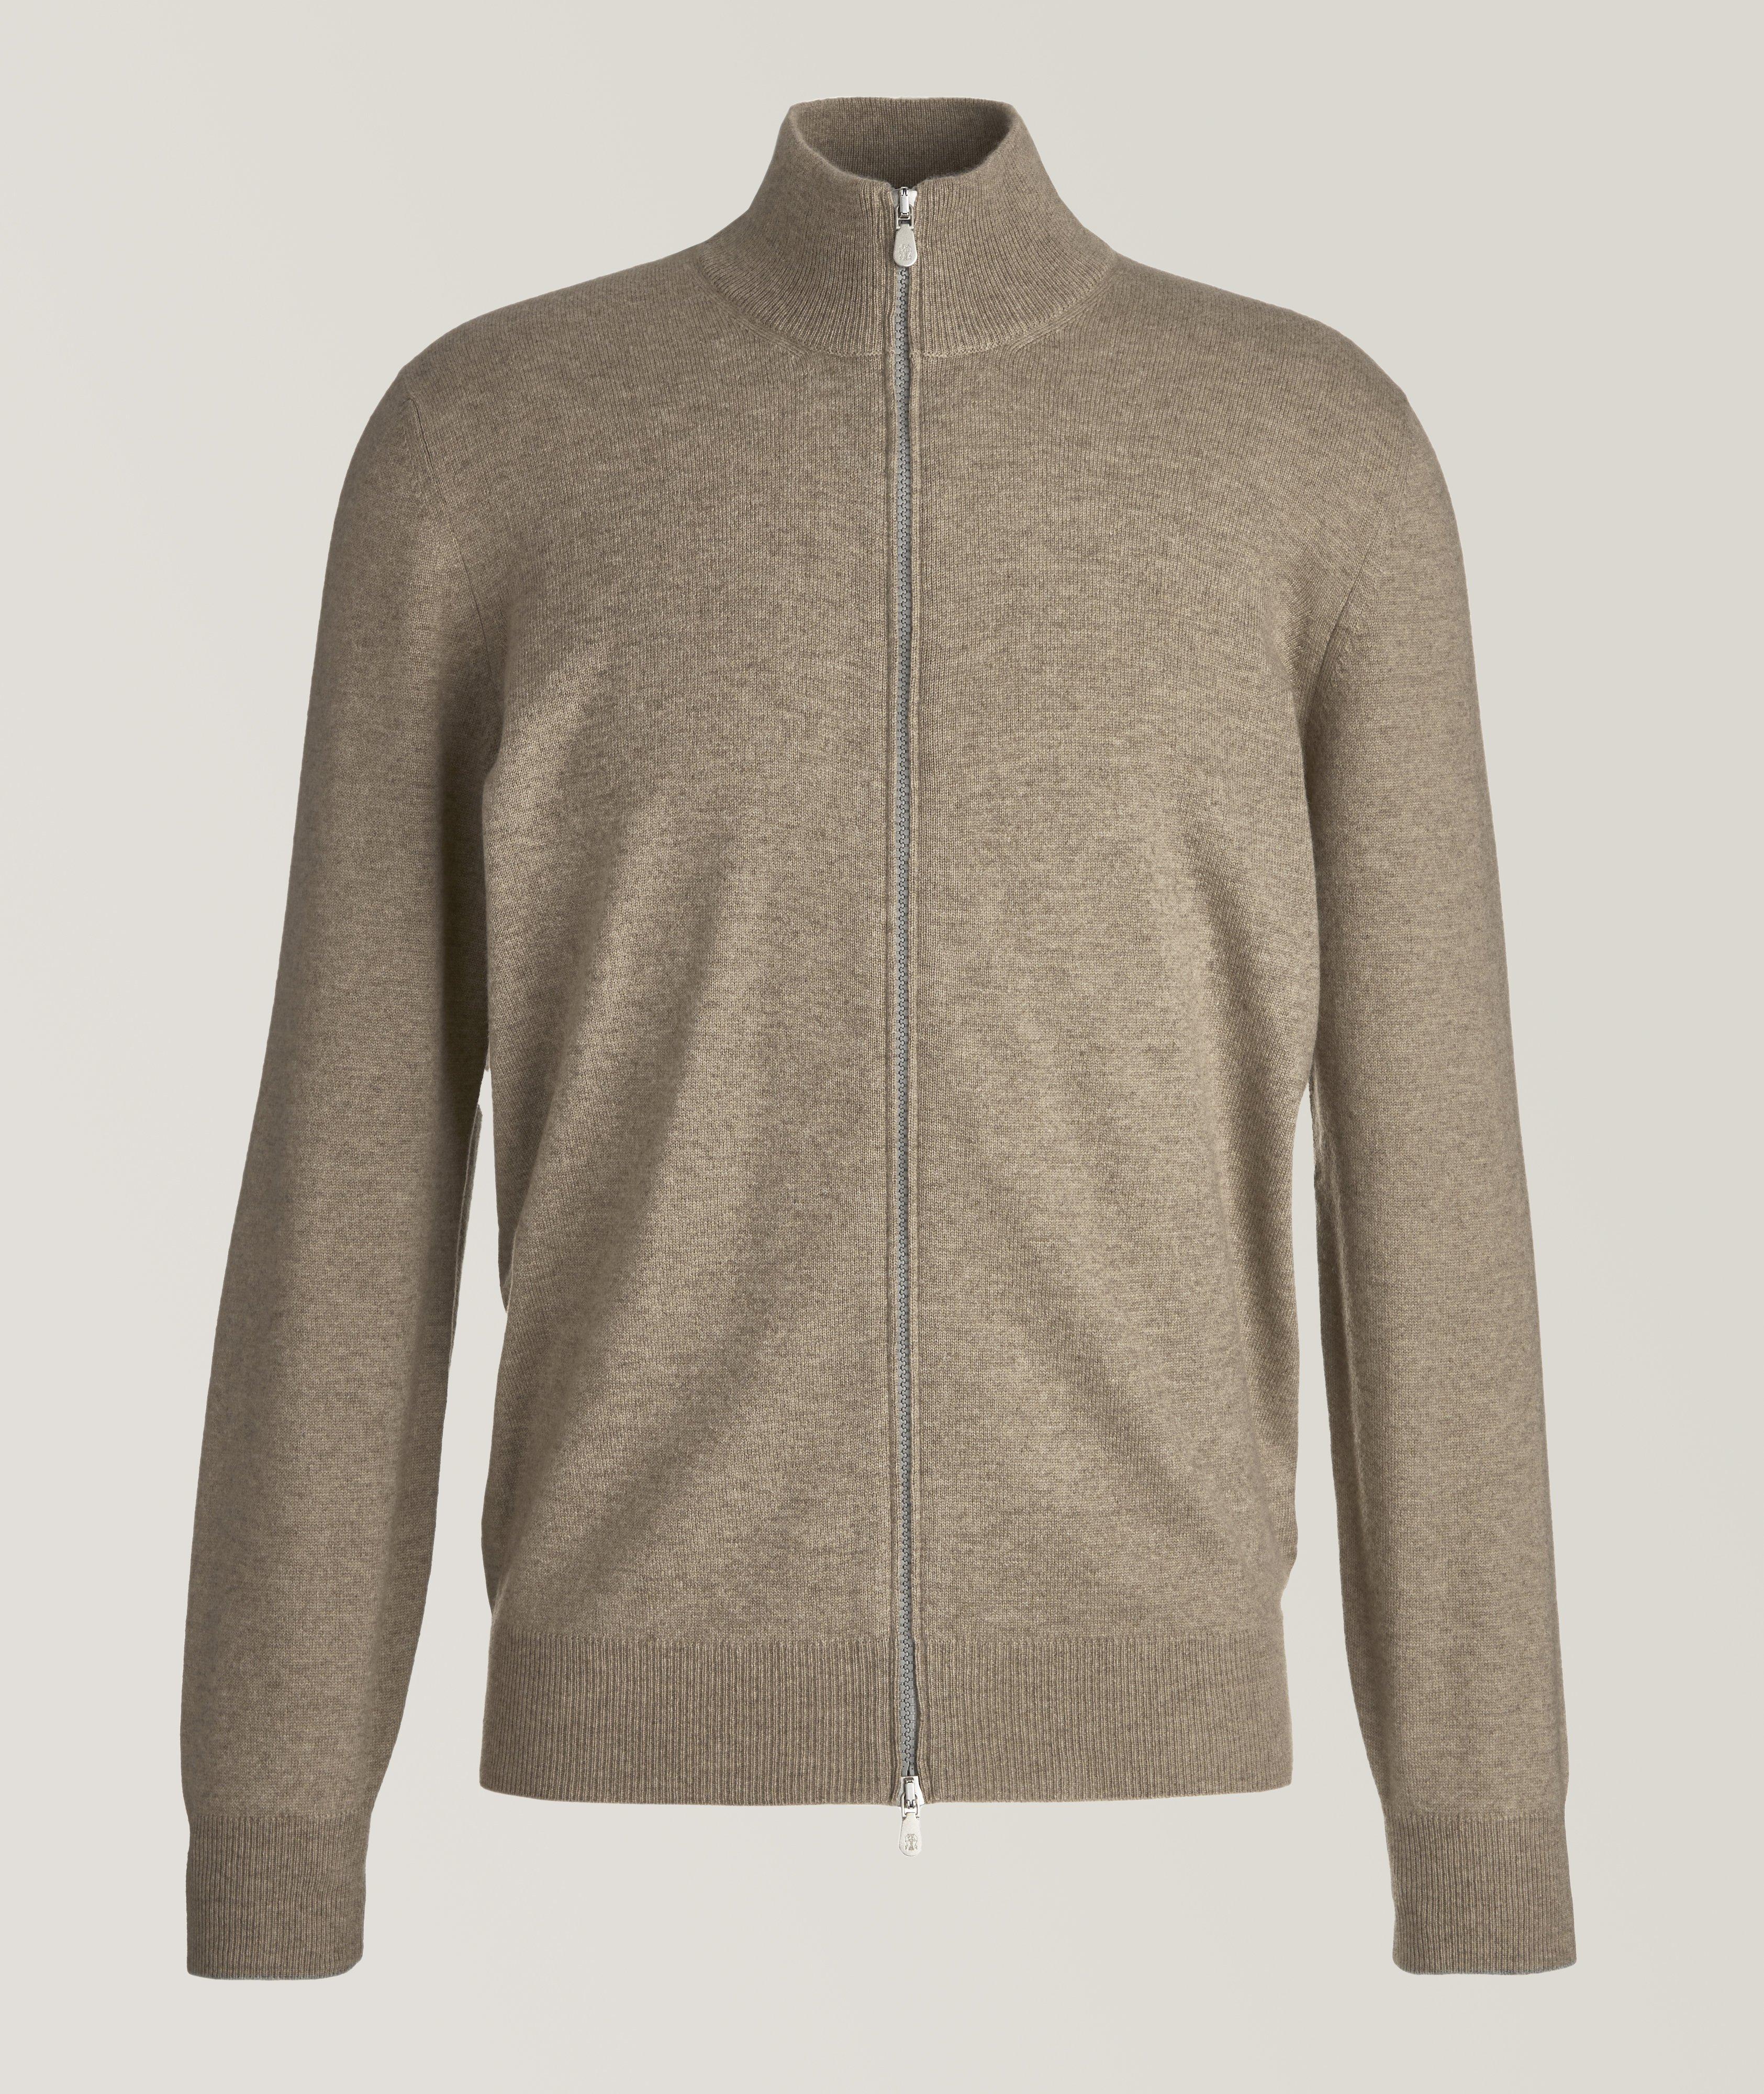 Full Zip Cashmere Knitted Cardigan image 0